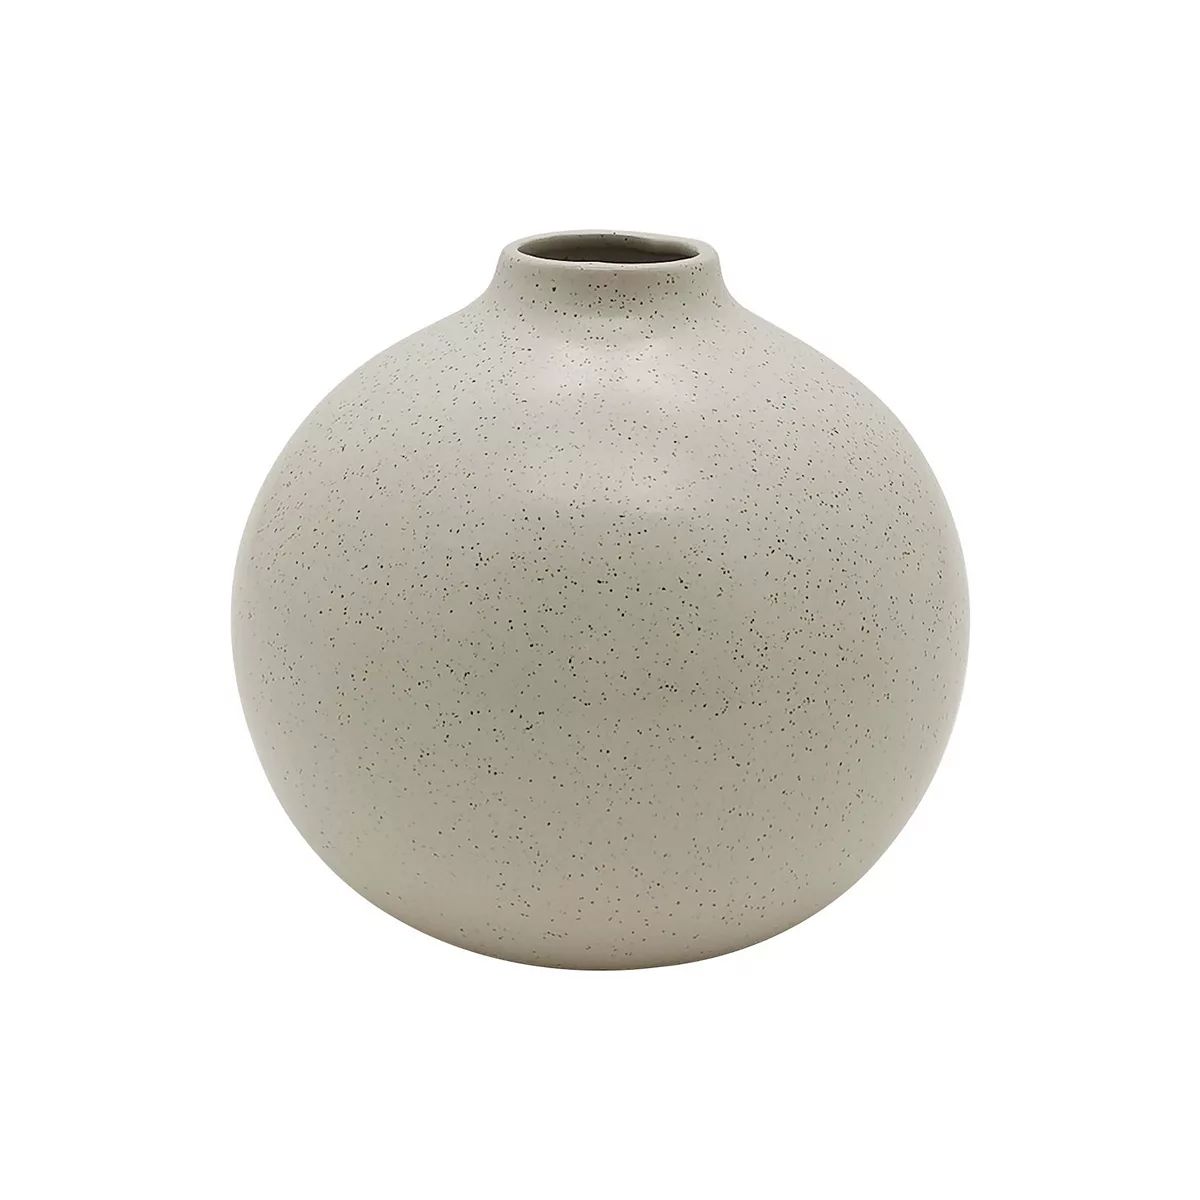 Sonoma Goods For Life® Small Round Brown Speckled Vase Table Decor | Kohl's